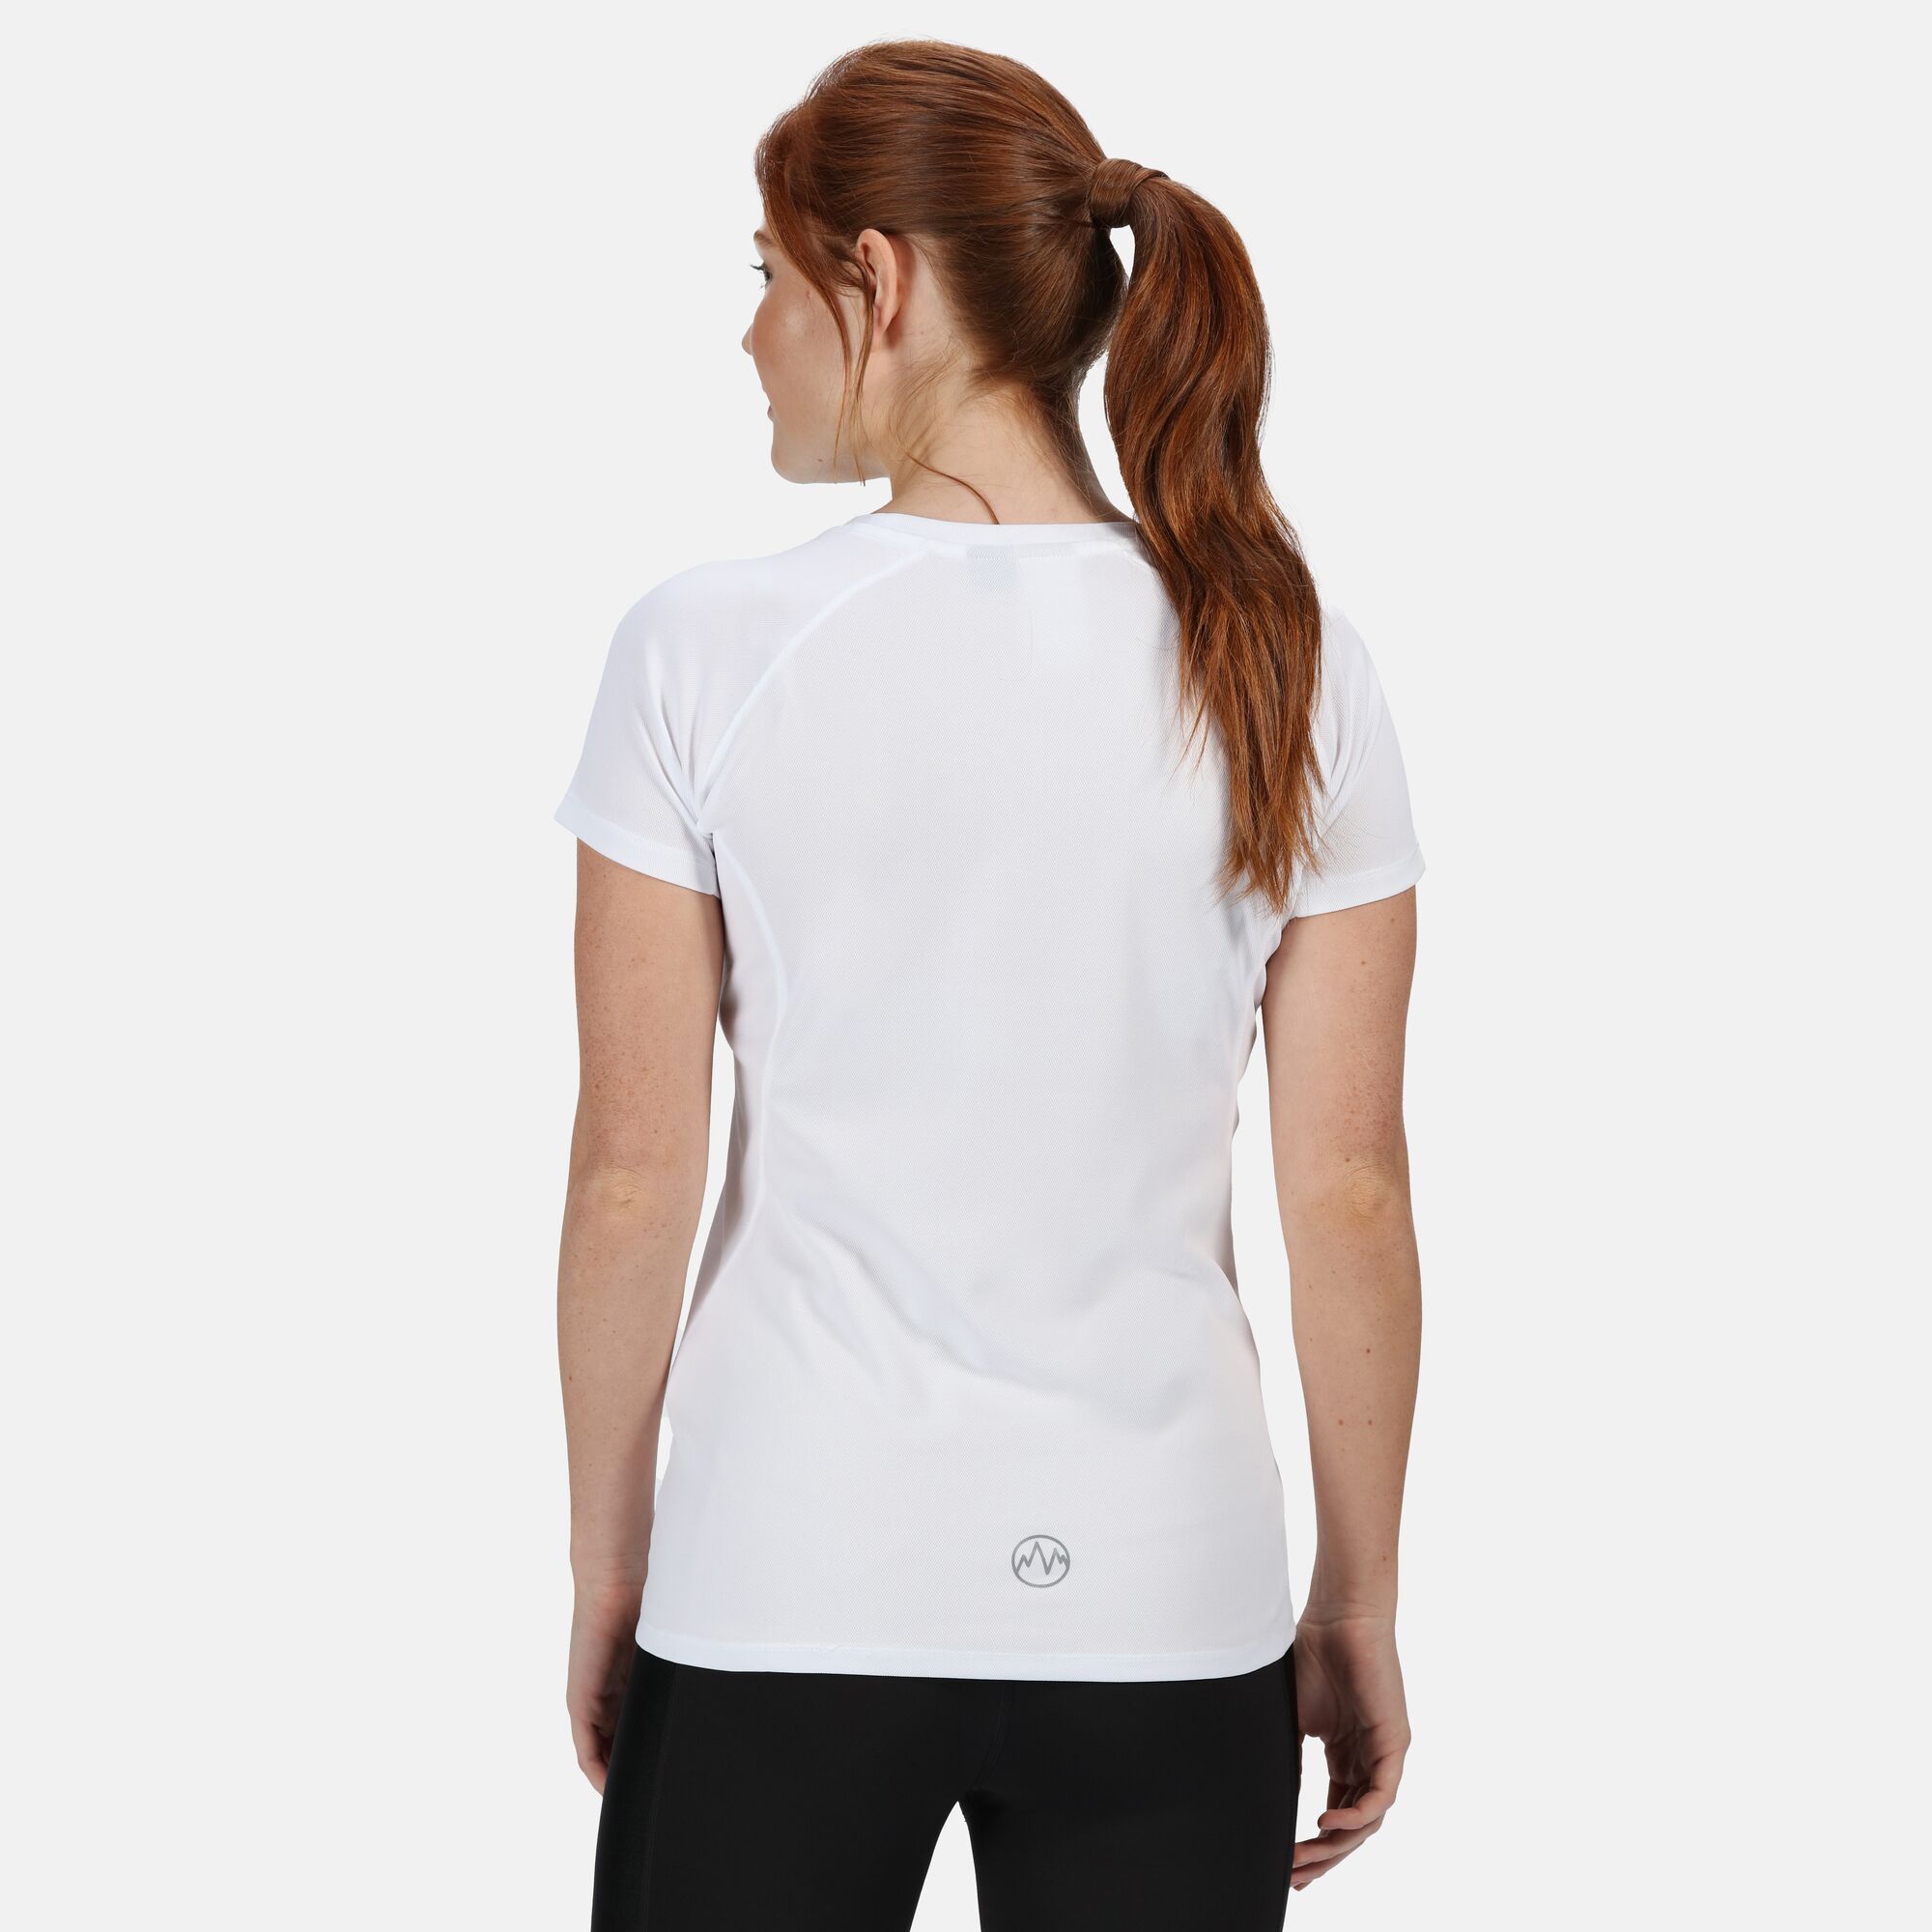 100% polyester. Womens short sleeve t-shirt. Lightweight Isovent pique fabric with natural stretch helps to keep you cool and dry by efficiently wicking sweat to the surface. An  finish keeps you feeling fresher for longer. Made with ergonomic, flat seams and no labels to give â€˜no rubÂ´ active comfort. Streamline panelling gives a high energy look. A compact earphone loop helps to keep you in the zone. Regatta Activewear Womens sizing (chest approx): 8 (32in/81cm), 10 (34in/86cm), 12 (36in/92cm), 14 (38in/97cm), 16 (40in/102cm), 18 (42in/107cm), 20 (44in/112cm), 22 (46in/117cm).